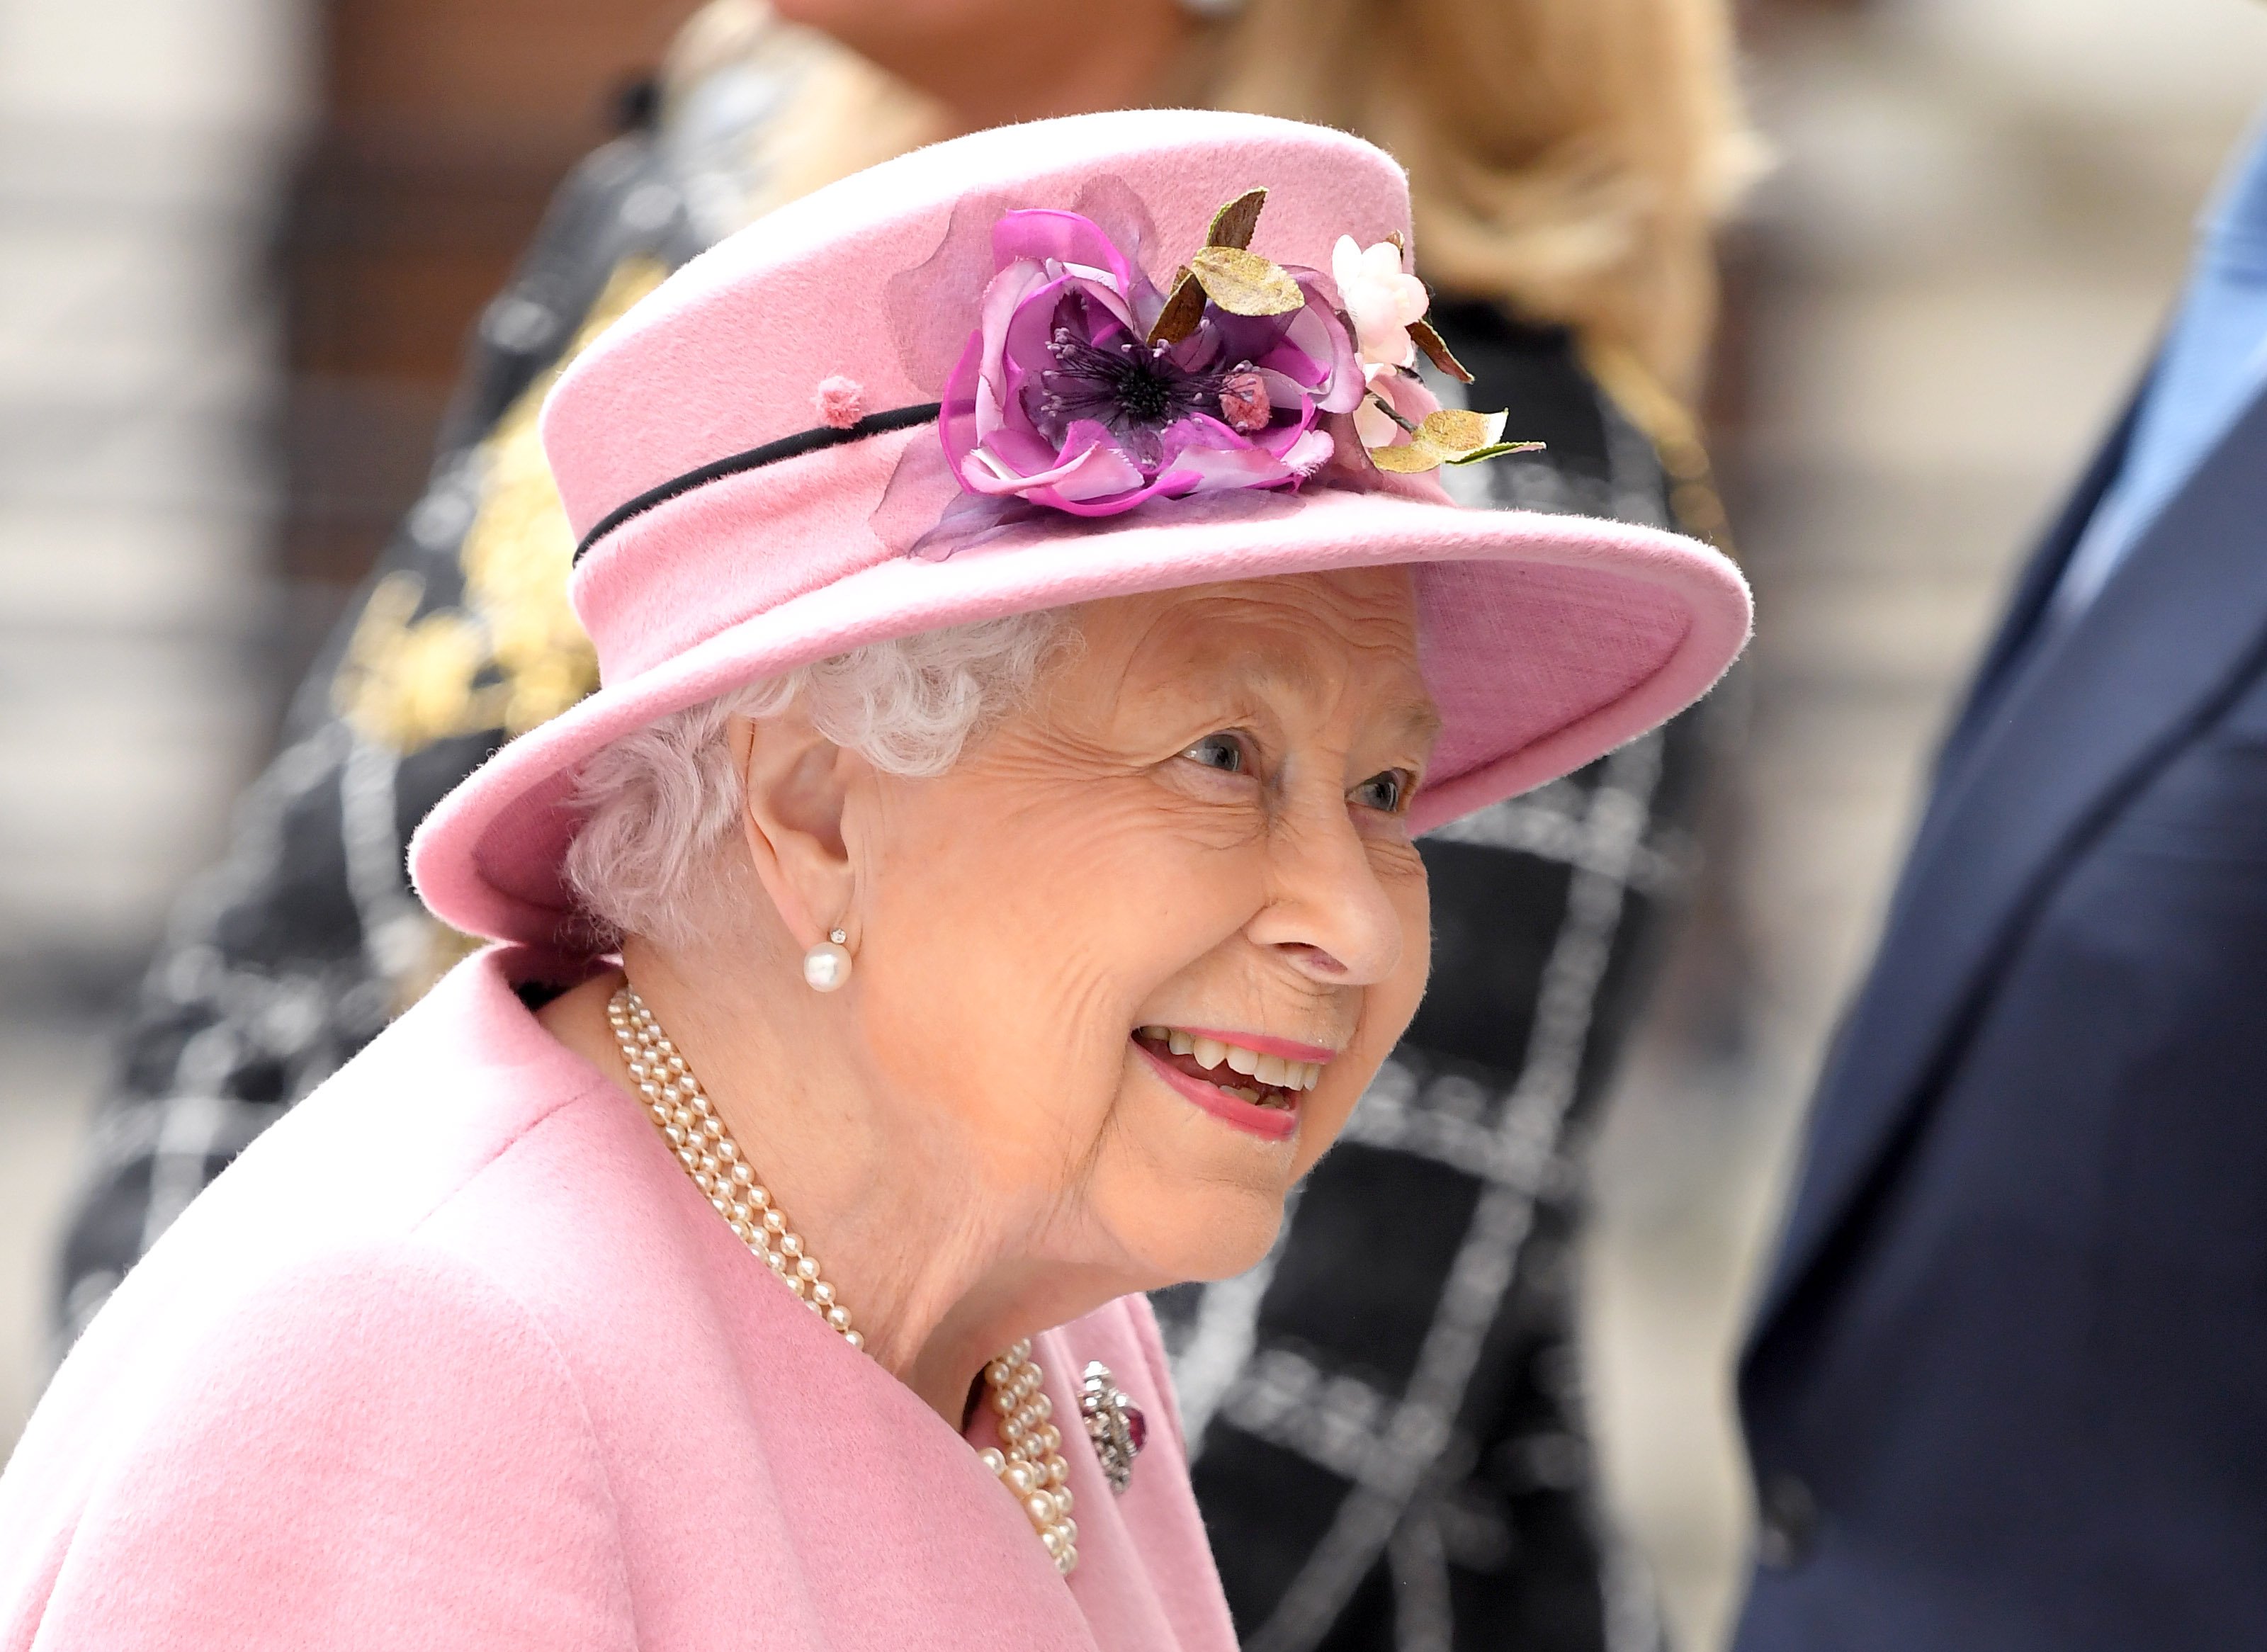  Queen Elizabeth II visiting Leicester Cathedral in central England on March 8, 2012. | Source: Getty Image